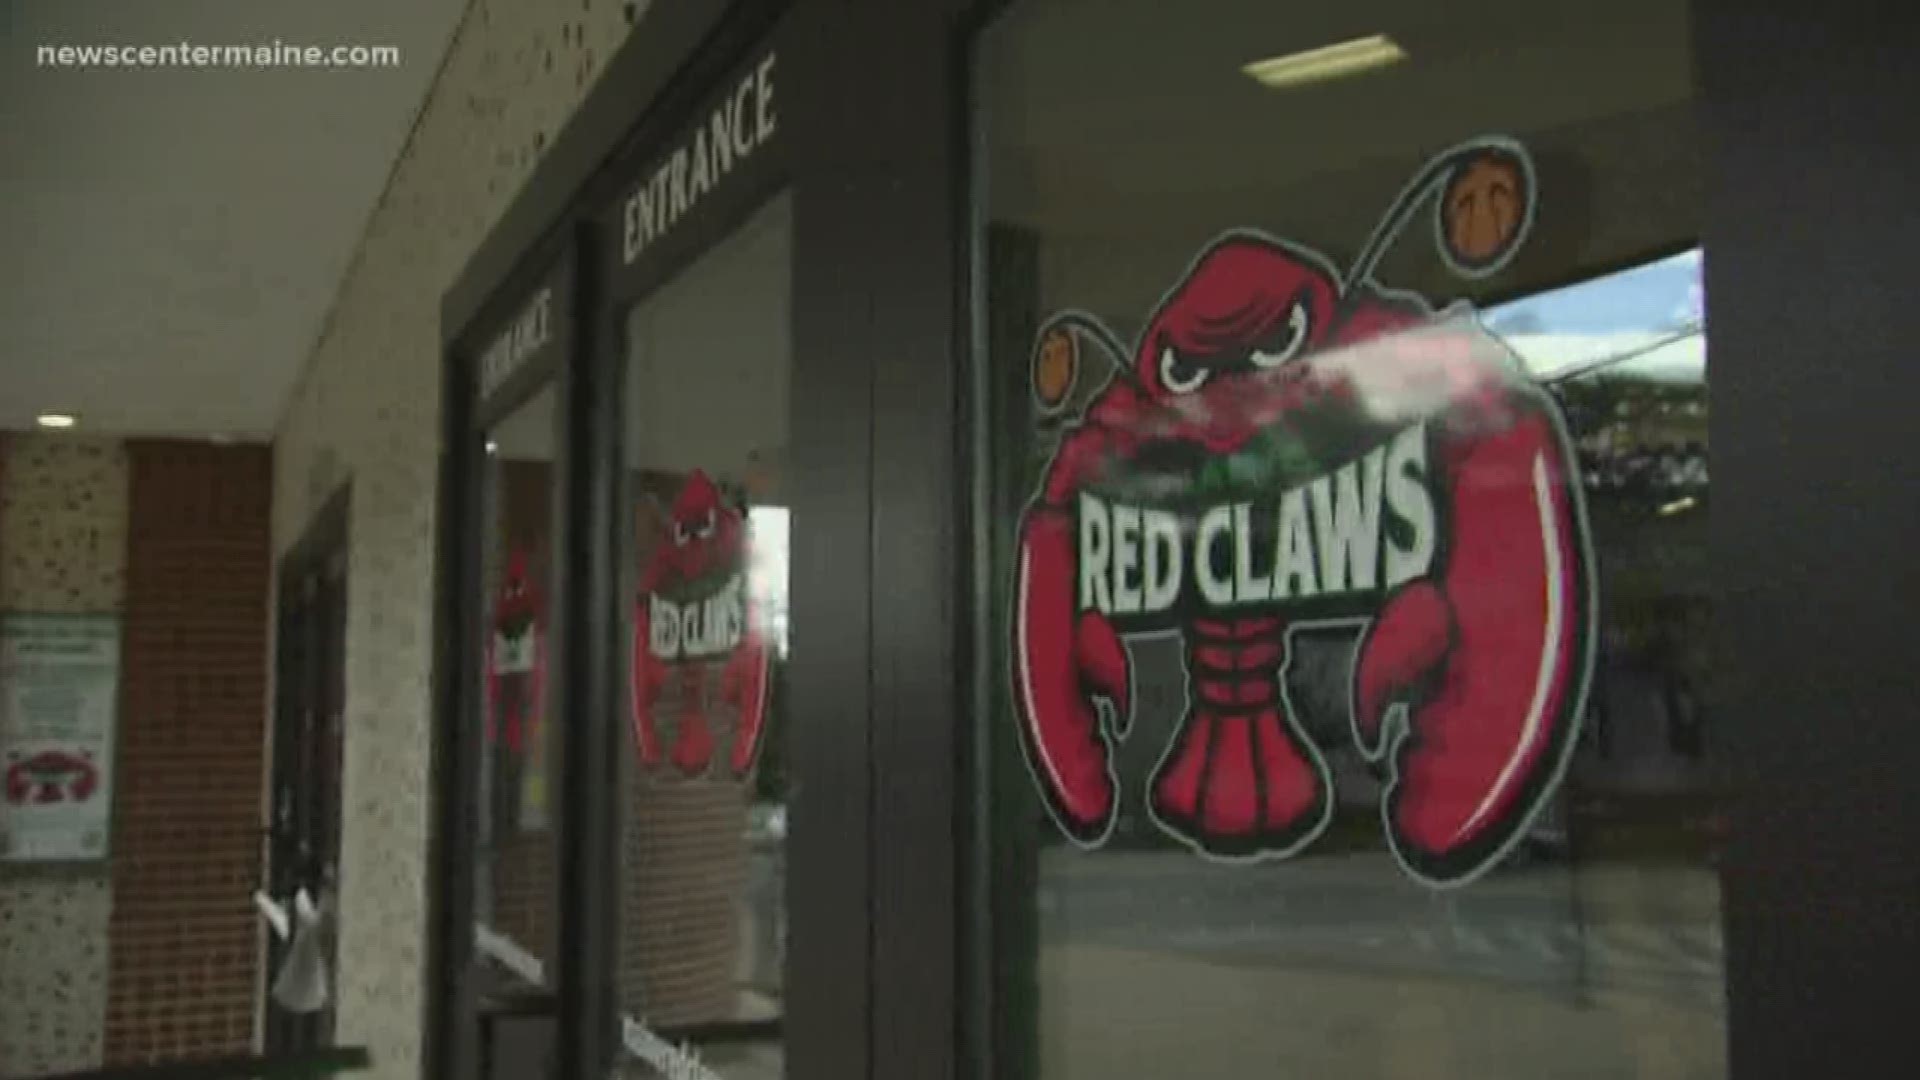 Maine Red Claws' fate remains unclear